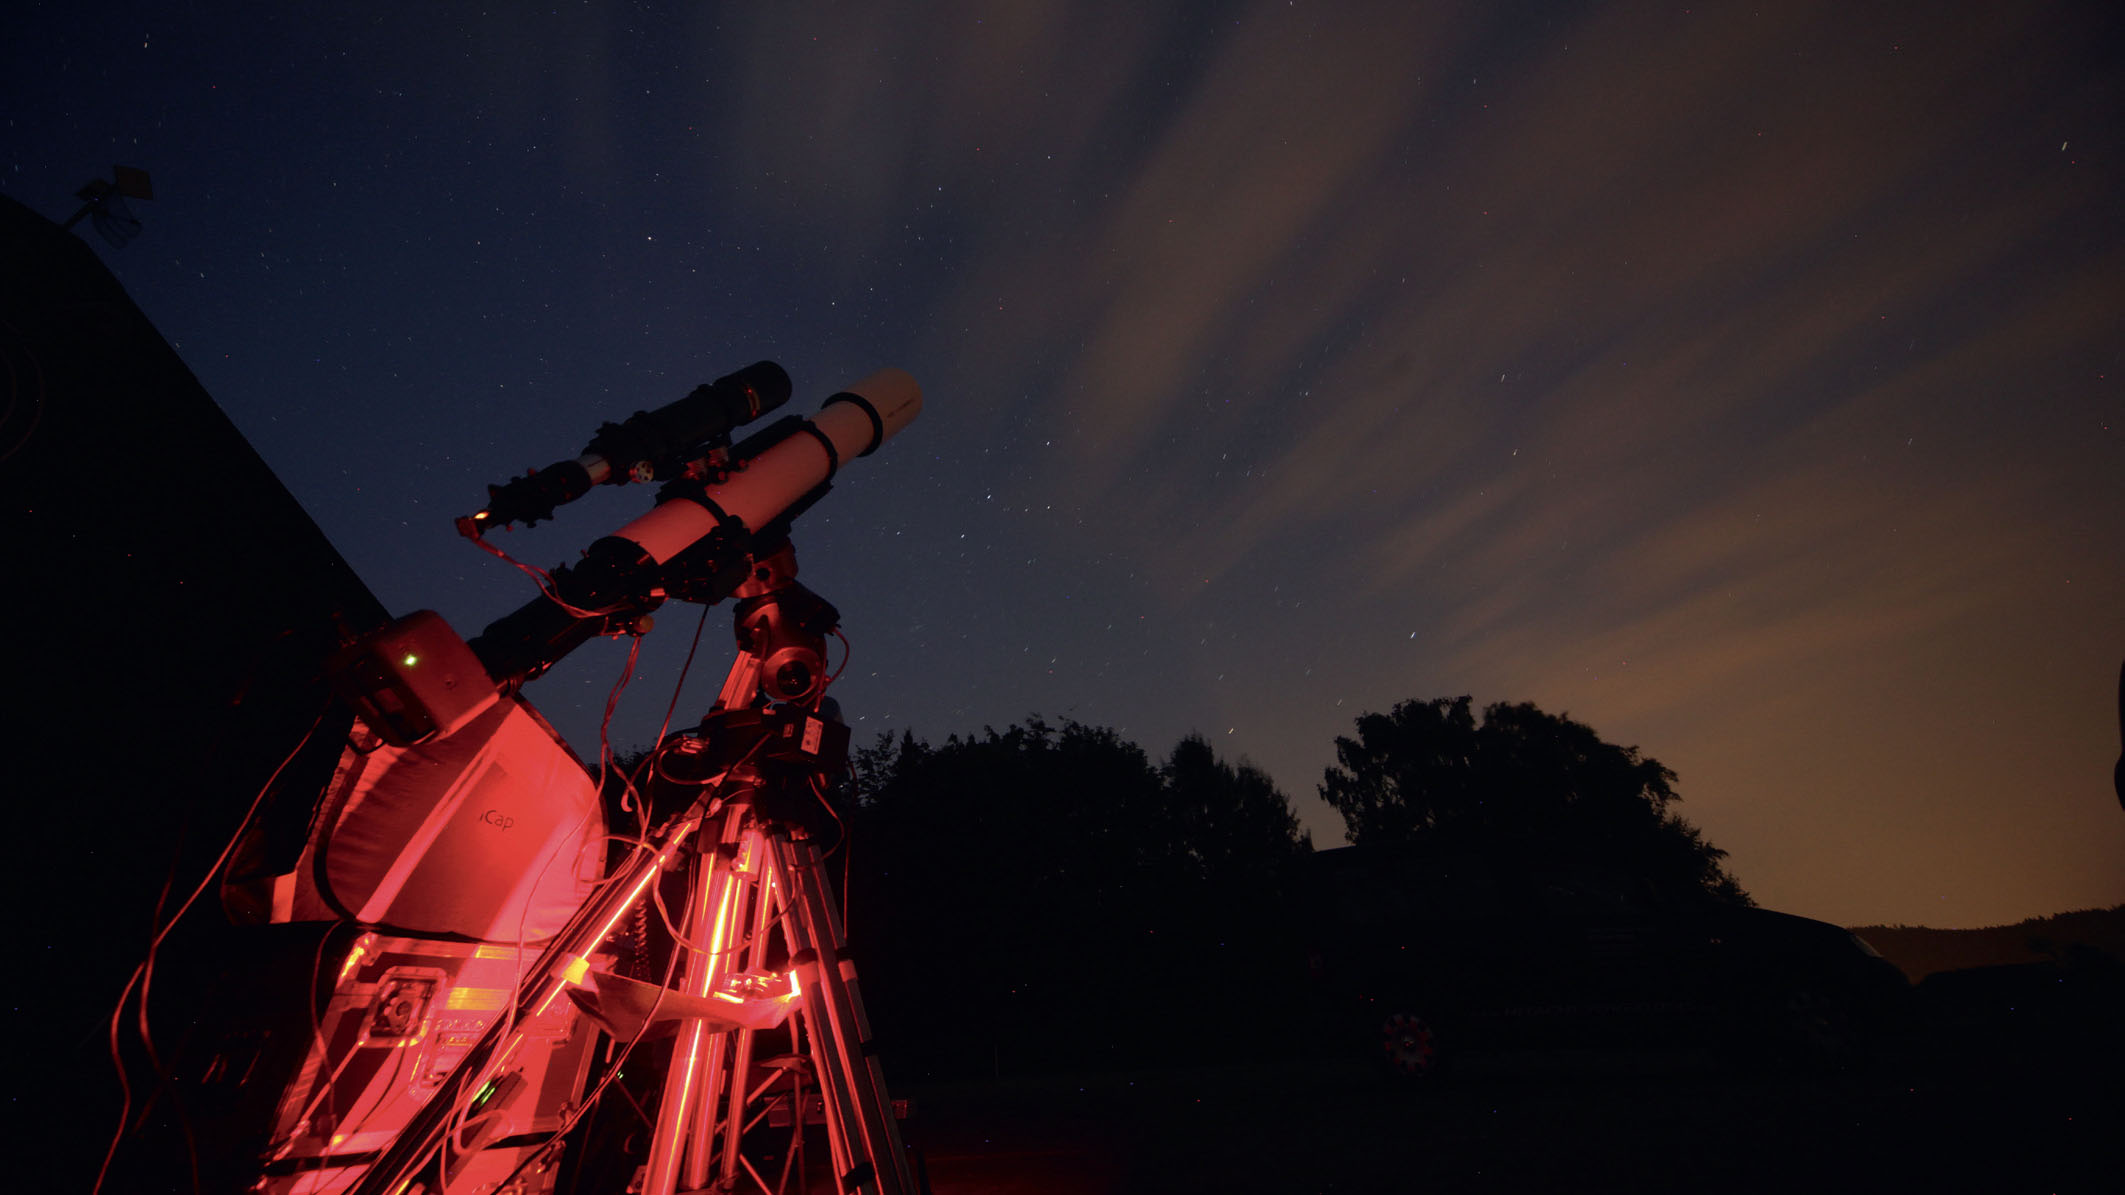 Perfectly-exposed images guaranteed: a telescope with autoguiding equipment in action. Mario Weigand